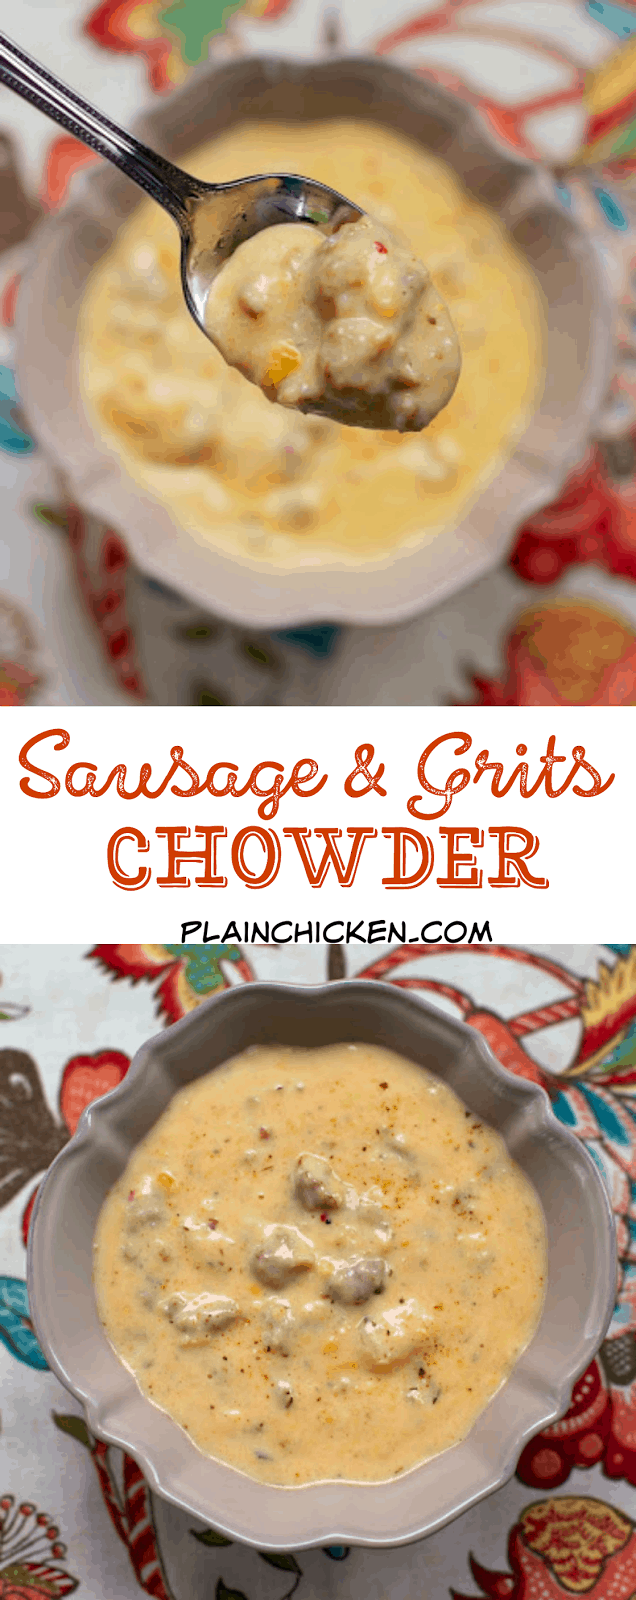 Sausage and Grits Chowder - sausage, potato soup, creamed corn, milk, cajun seasoning, grits and water. Ready in about 15 minutes! SO delicious!